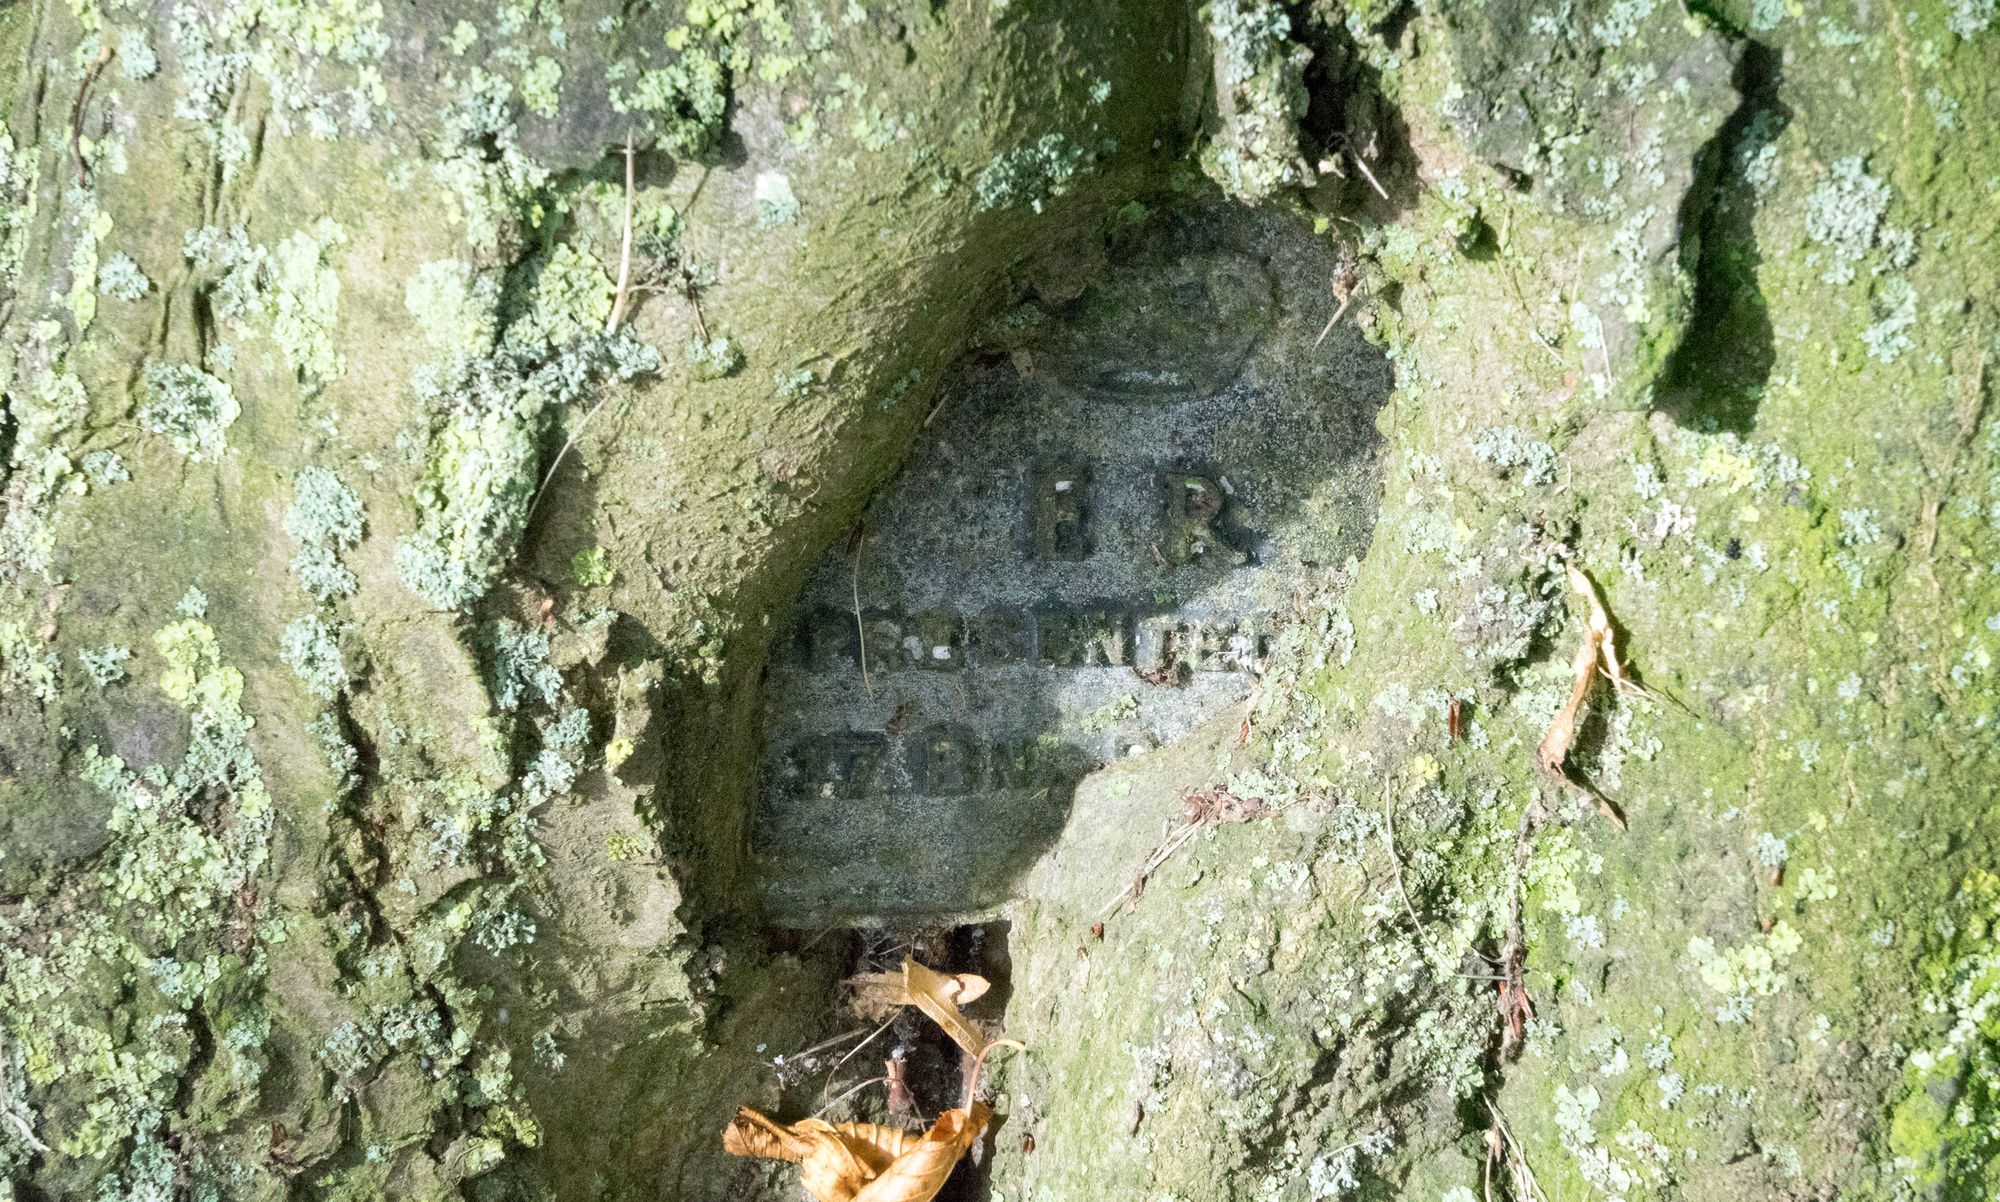 One of the plaques, marked "Presented by 17th Bn RAF" has almost been completely covered by its tree.